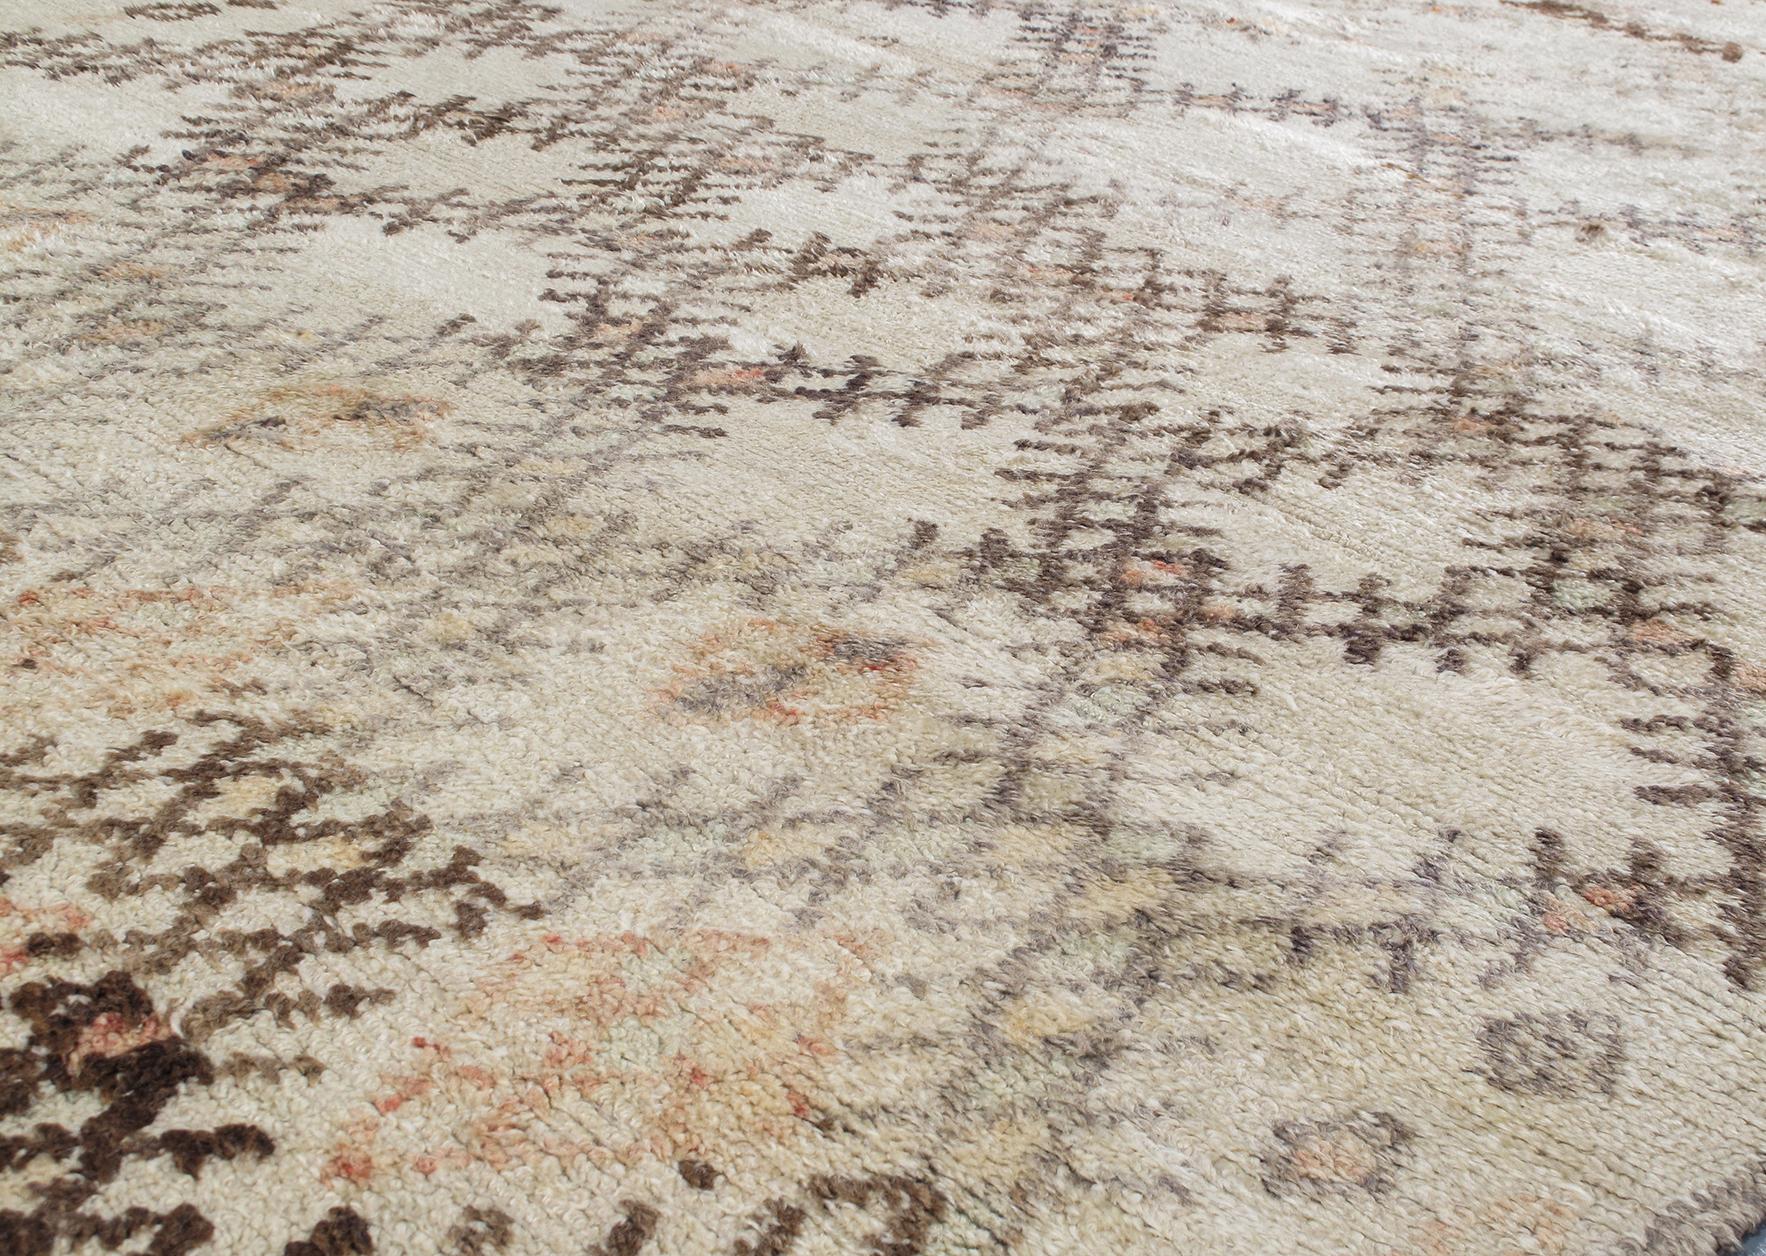 Our vintage Moroccan rugs are part of a skillfully curated collection of rare and unusual designs. They are made of all-natural dyes and 100% handspun wool from the Atlas Mountain region in North Africa. These rugs are all one-of-kind as they were